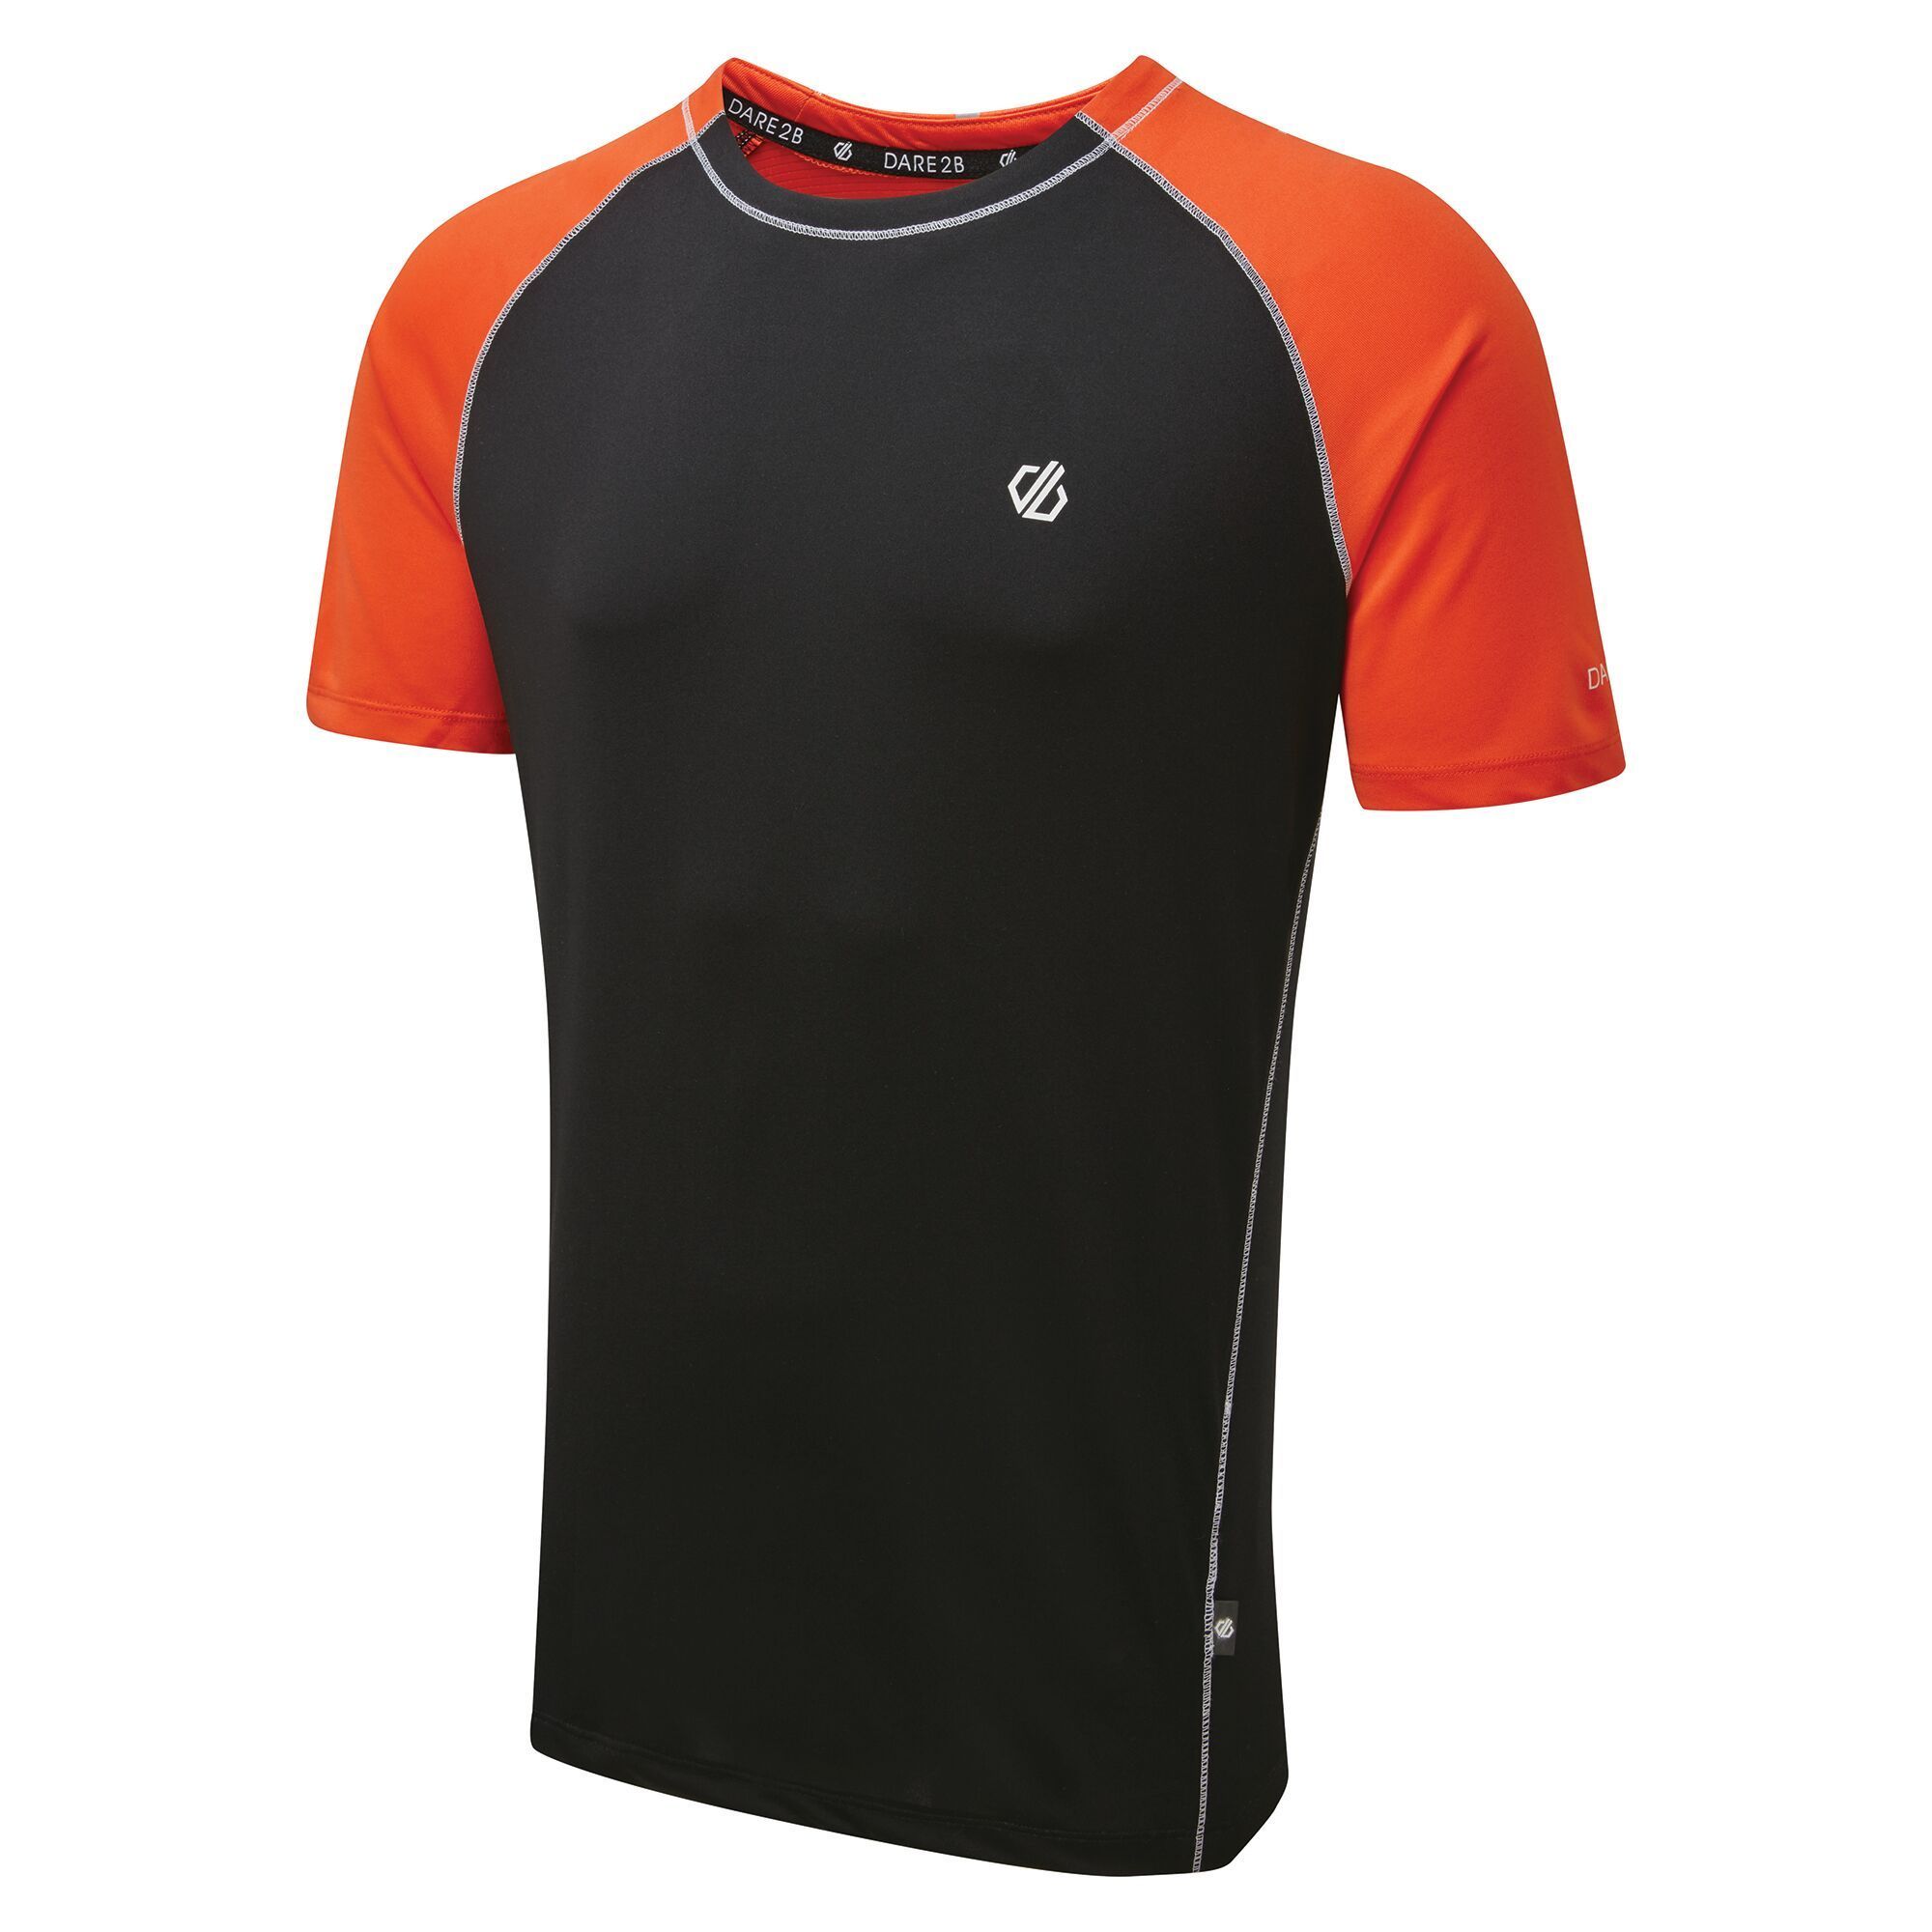 Material: 100% Polyester (Q-Wic Plus lightweight polyester fabric). Short sleeved t-shirt with breathable, airflow mesh ventilated panel back. Designed for high-intensity workouts and other activities like hiking. Anti-bacterial odour control treatment. Reflective Dare 2B logo print detail.